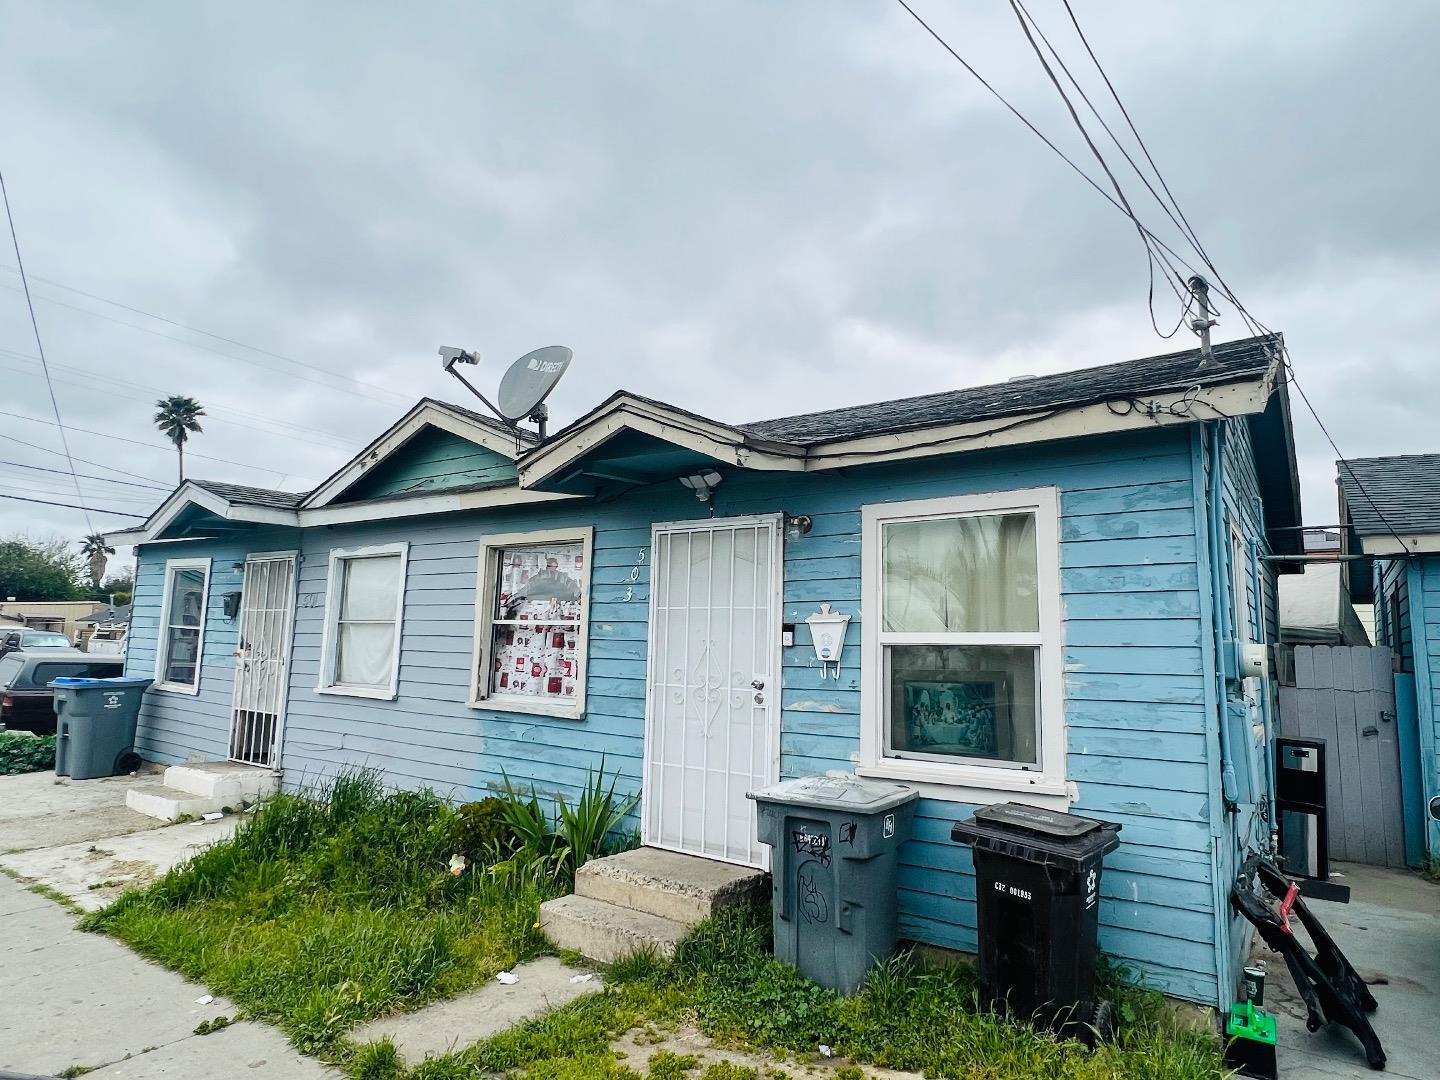 Photo of 501 Green St in Salinas, CA